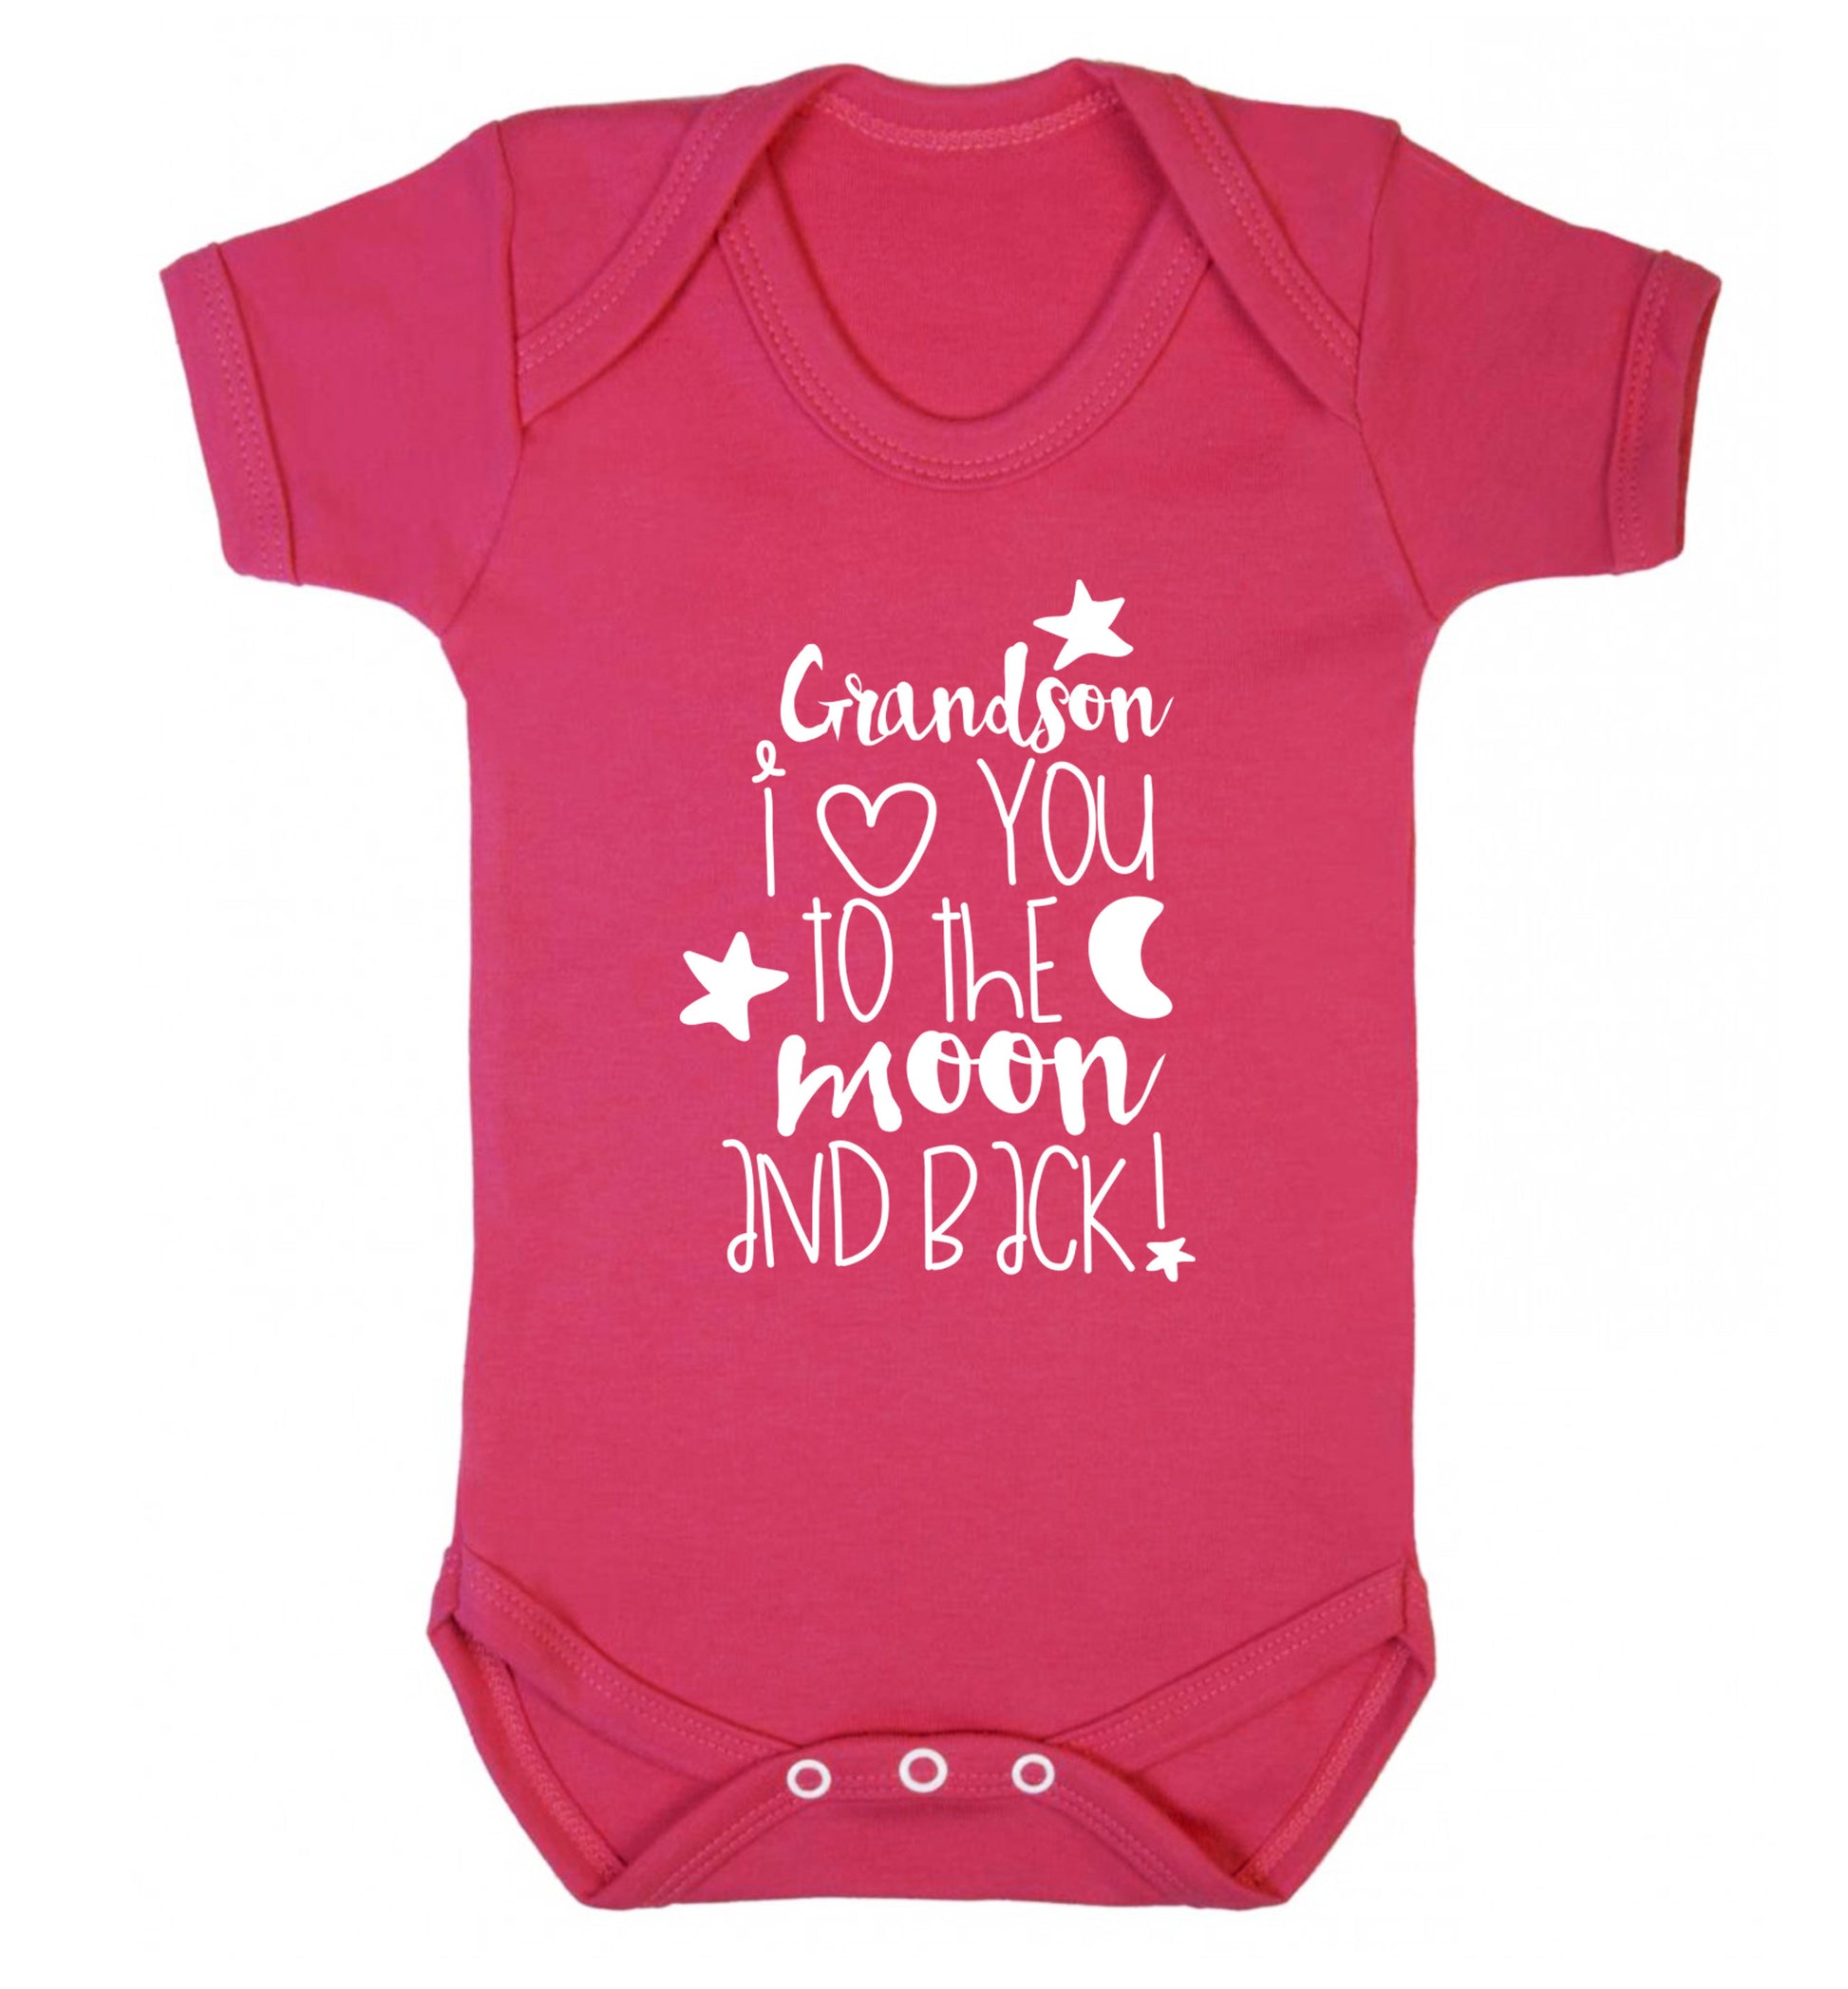 Grandson I love you to the moon and back Baby Vest dark pink 18-24 months